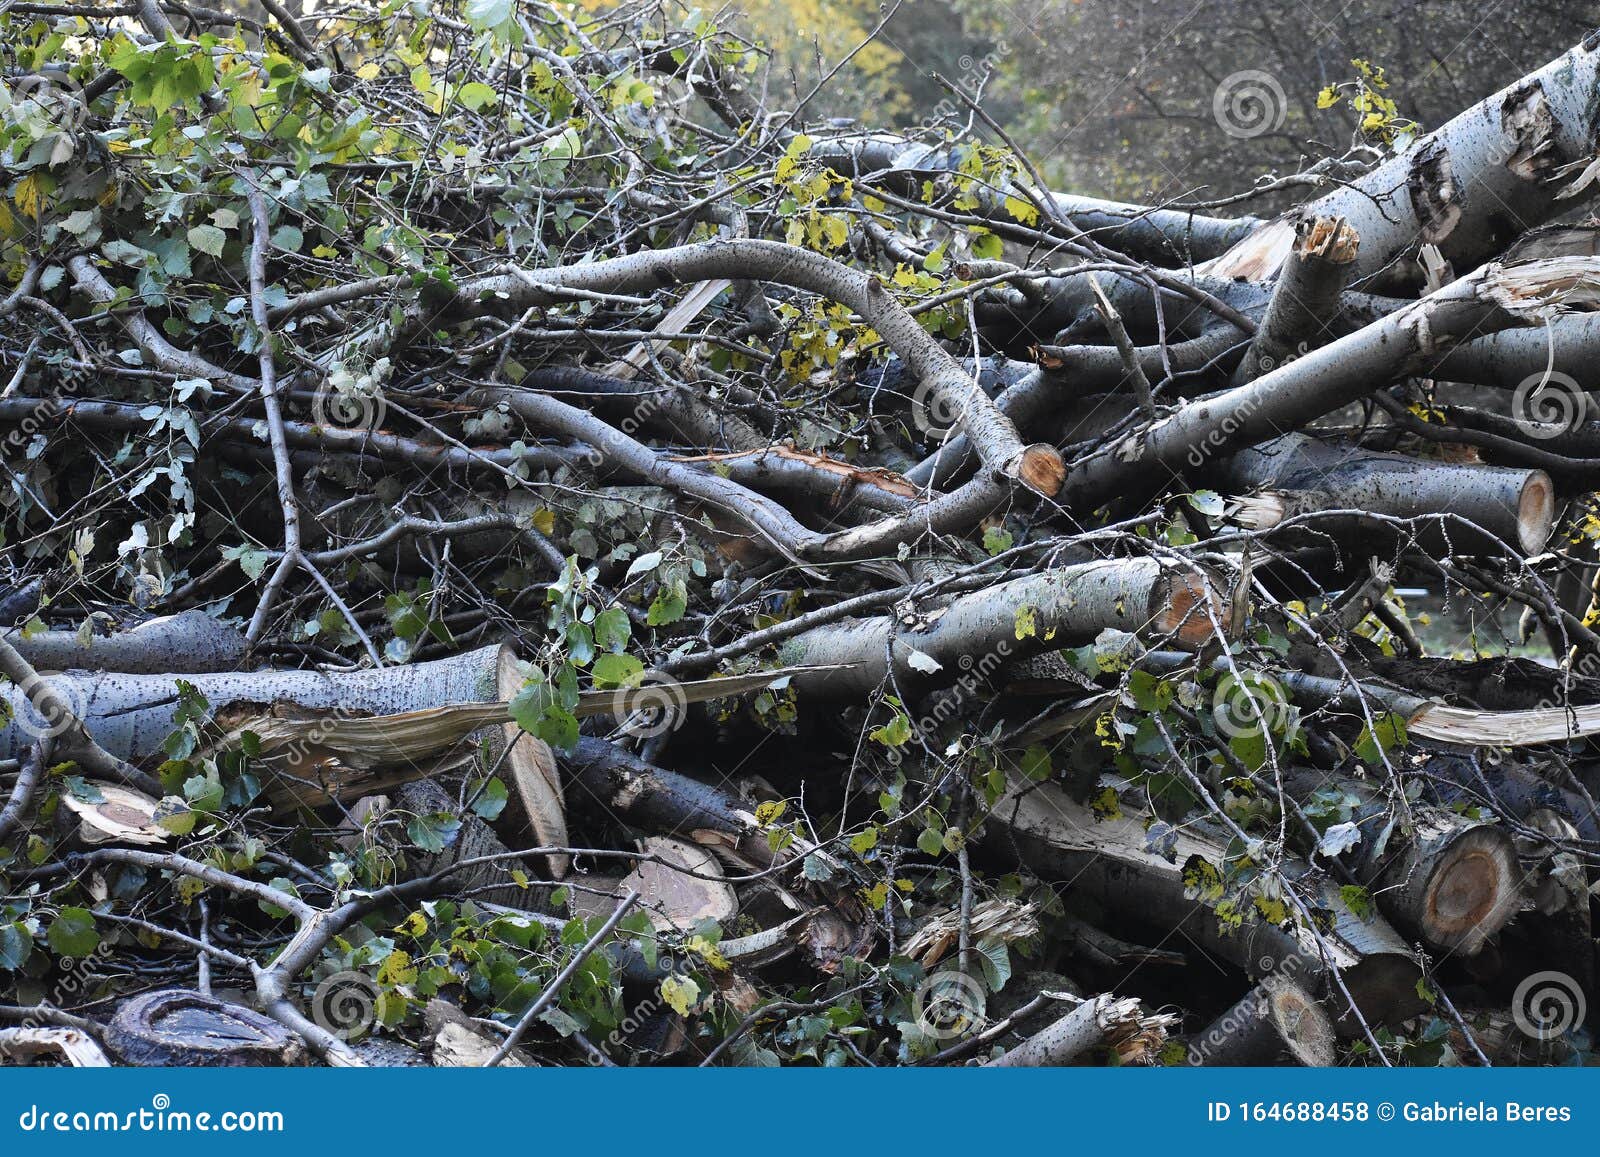 Close Up of a Pile of Cut Down Tree Branches. Stock Photo - Image of logs, nature: 164688458